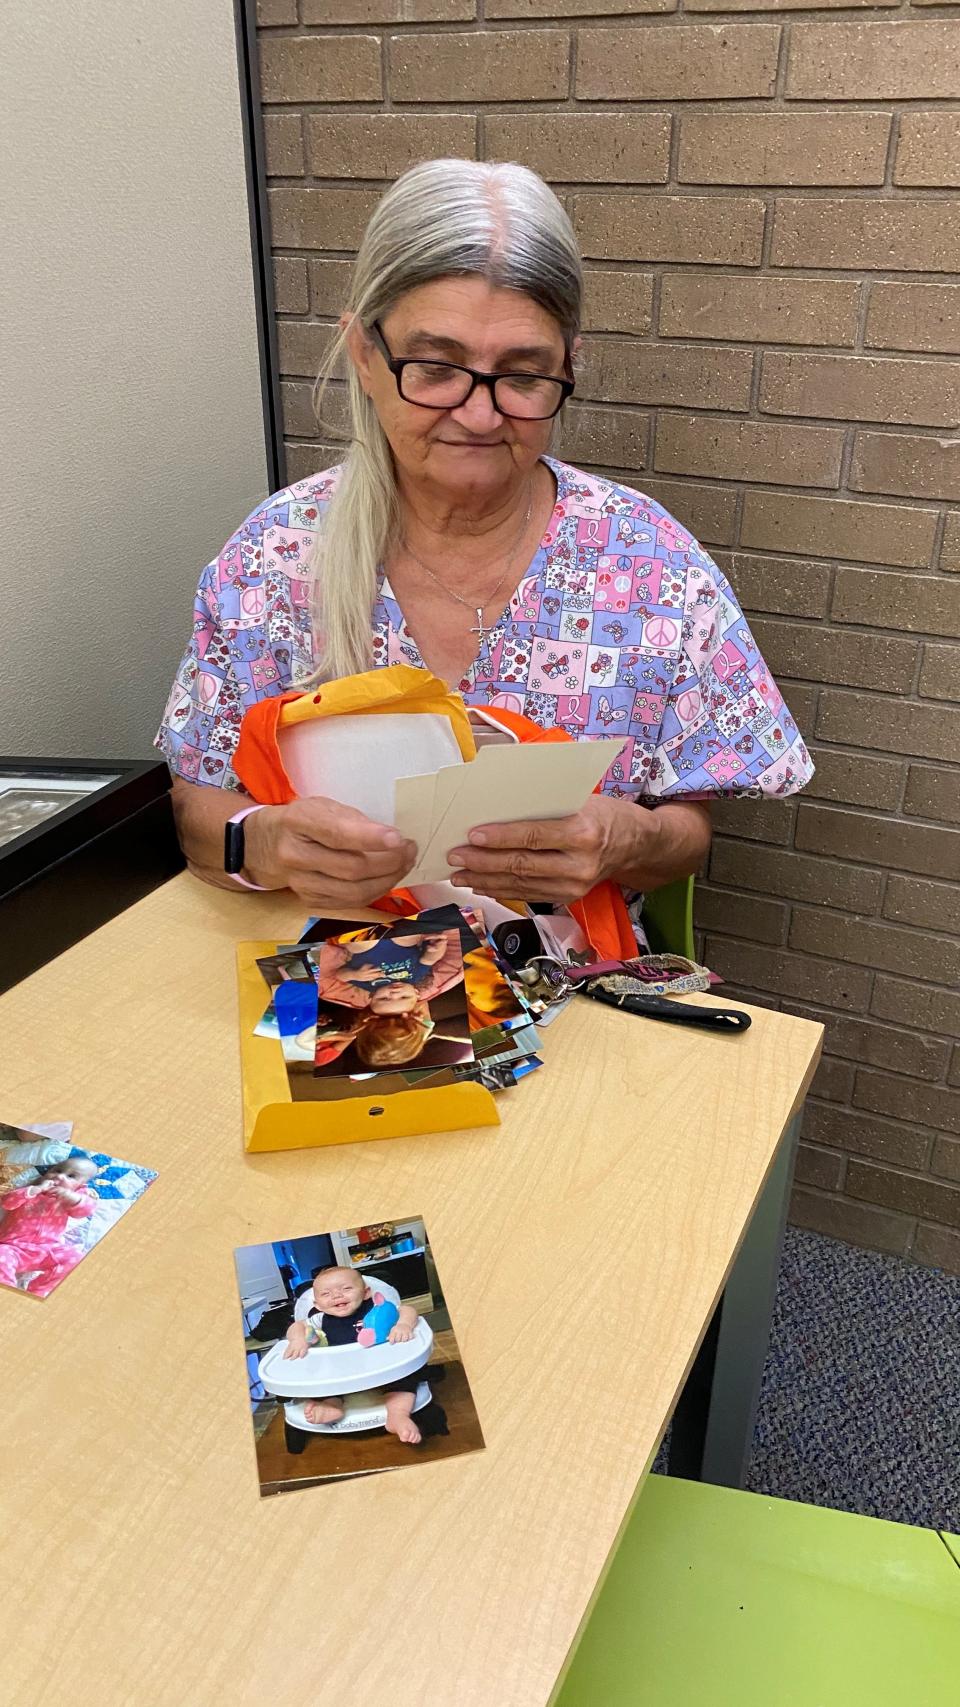 Kathy Ellerbe looks at photos of her grandson, Levi Cole Ellerbe, on July 28. The baby died on July 18, 2018, and his mother and her girlfriend are in prison after pleading guilty to charges in his death.